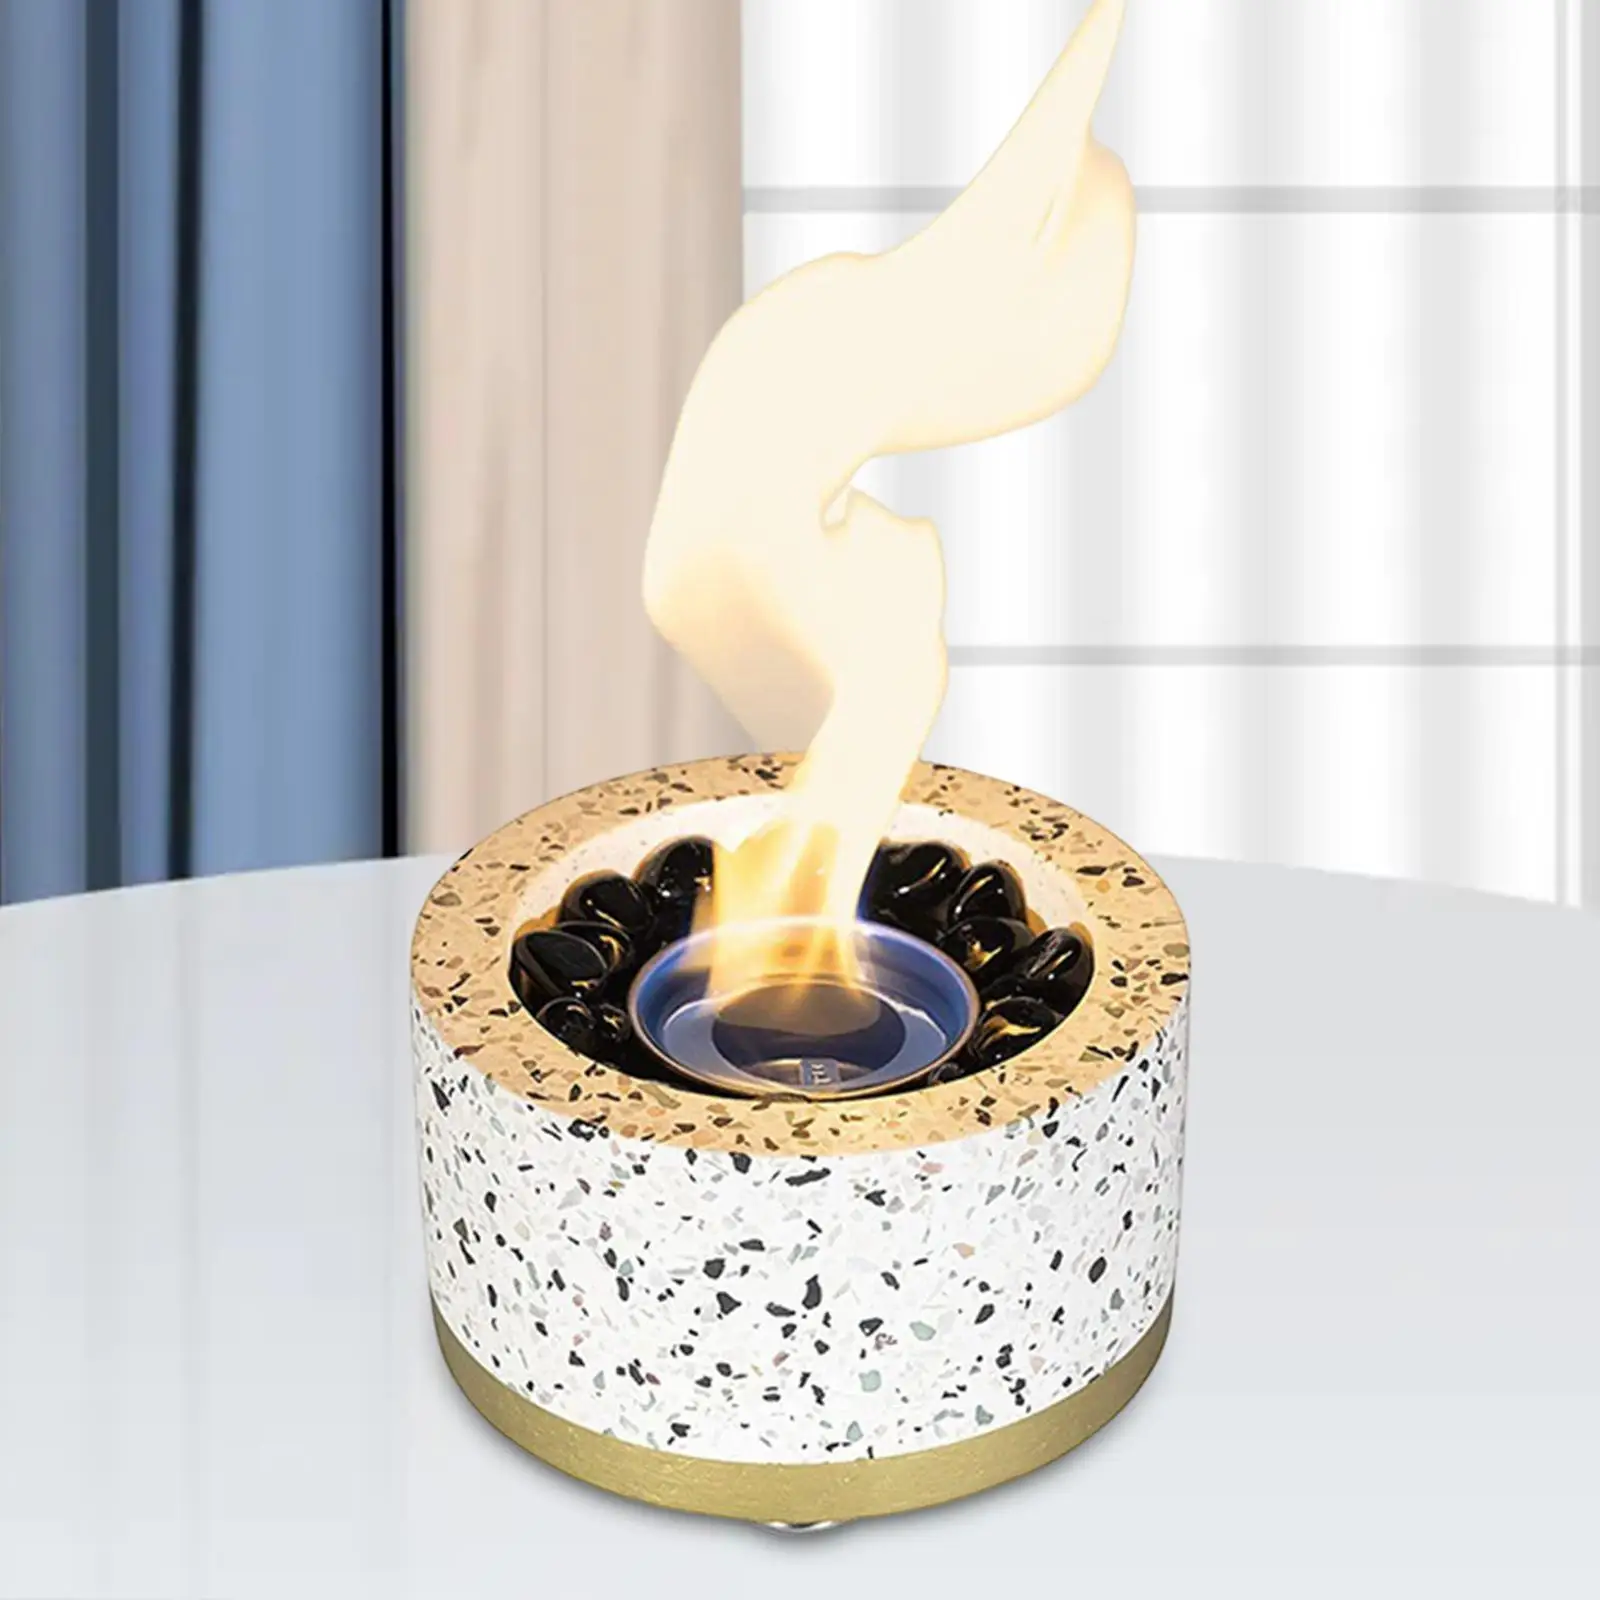 Tabletop Alcohol Fireplace Personal Small Long Burning Fire Pit for Dining Room Terraces Party Indoor Outdoor Decor